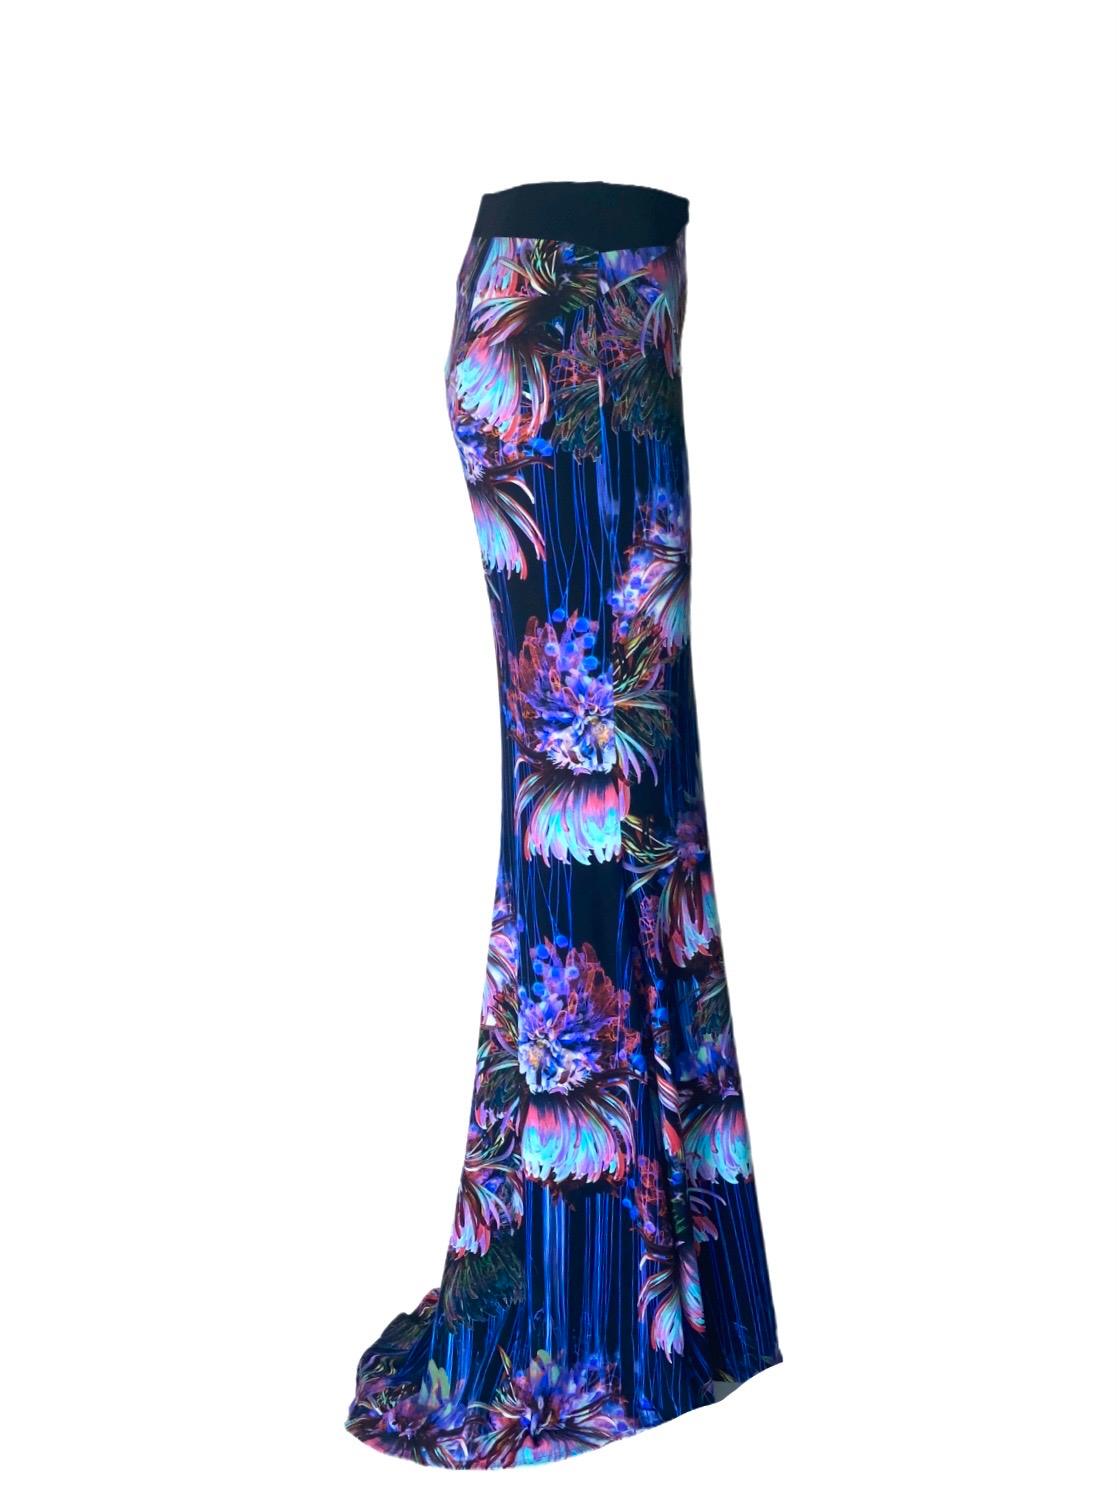 A beautiful ROBERTO CAVALLI evening skirt that will last you for years
From the most prestigious ROBERTO CAVALLI main line
Made out of most beautiful fabric with floral print
Fabric is discreetly signed with 